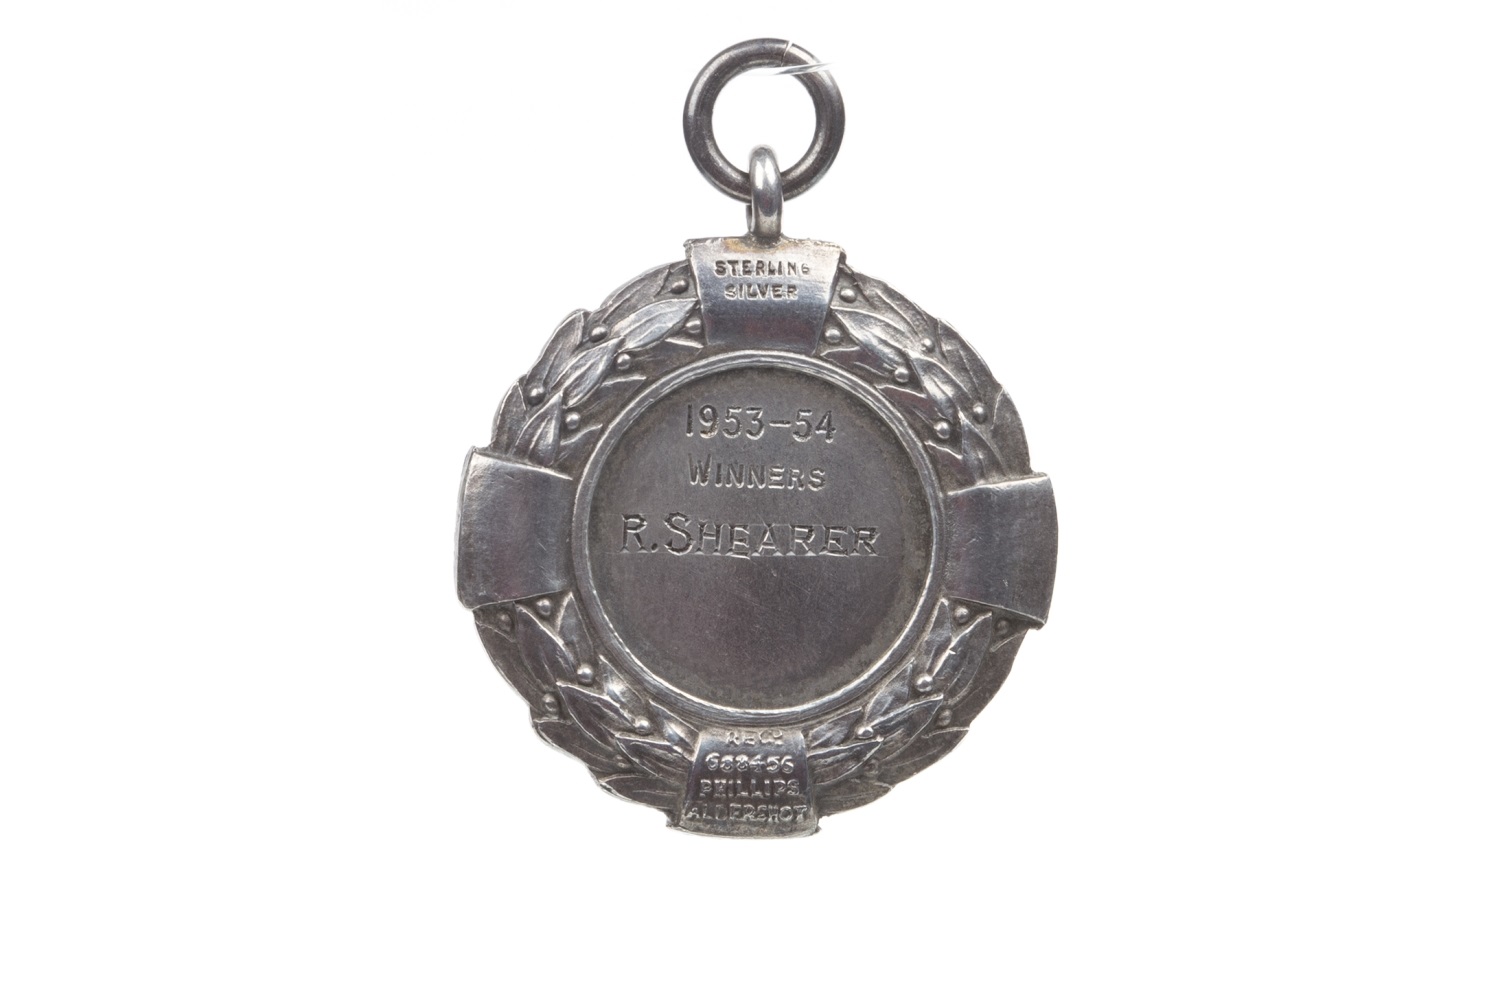 BOBBY SHEARER - HIS R.A.F. FOOTBALL ASSOCIATION ENAMELLED SILVER MEDAL 1953-54 - Image 2 of 2